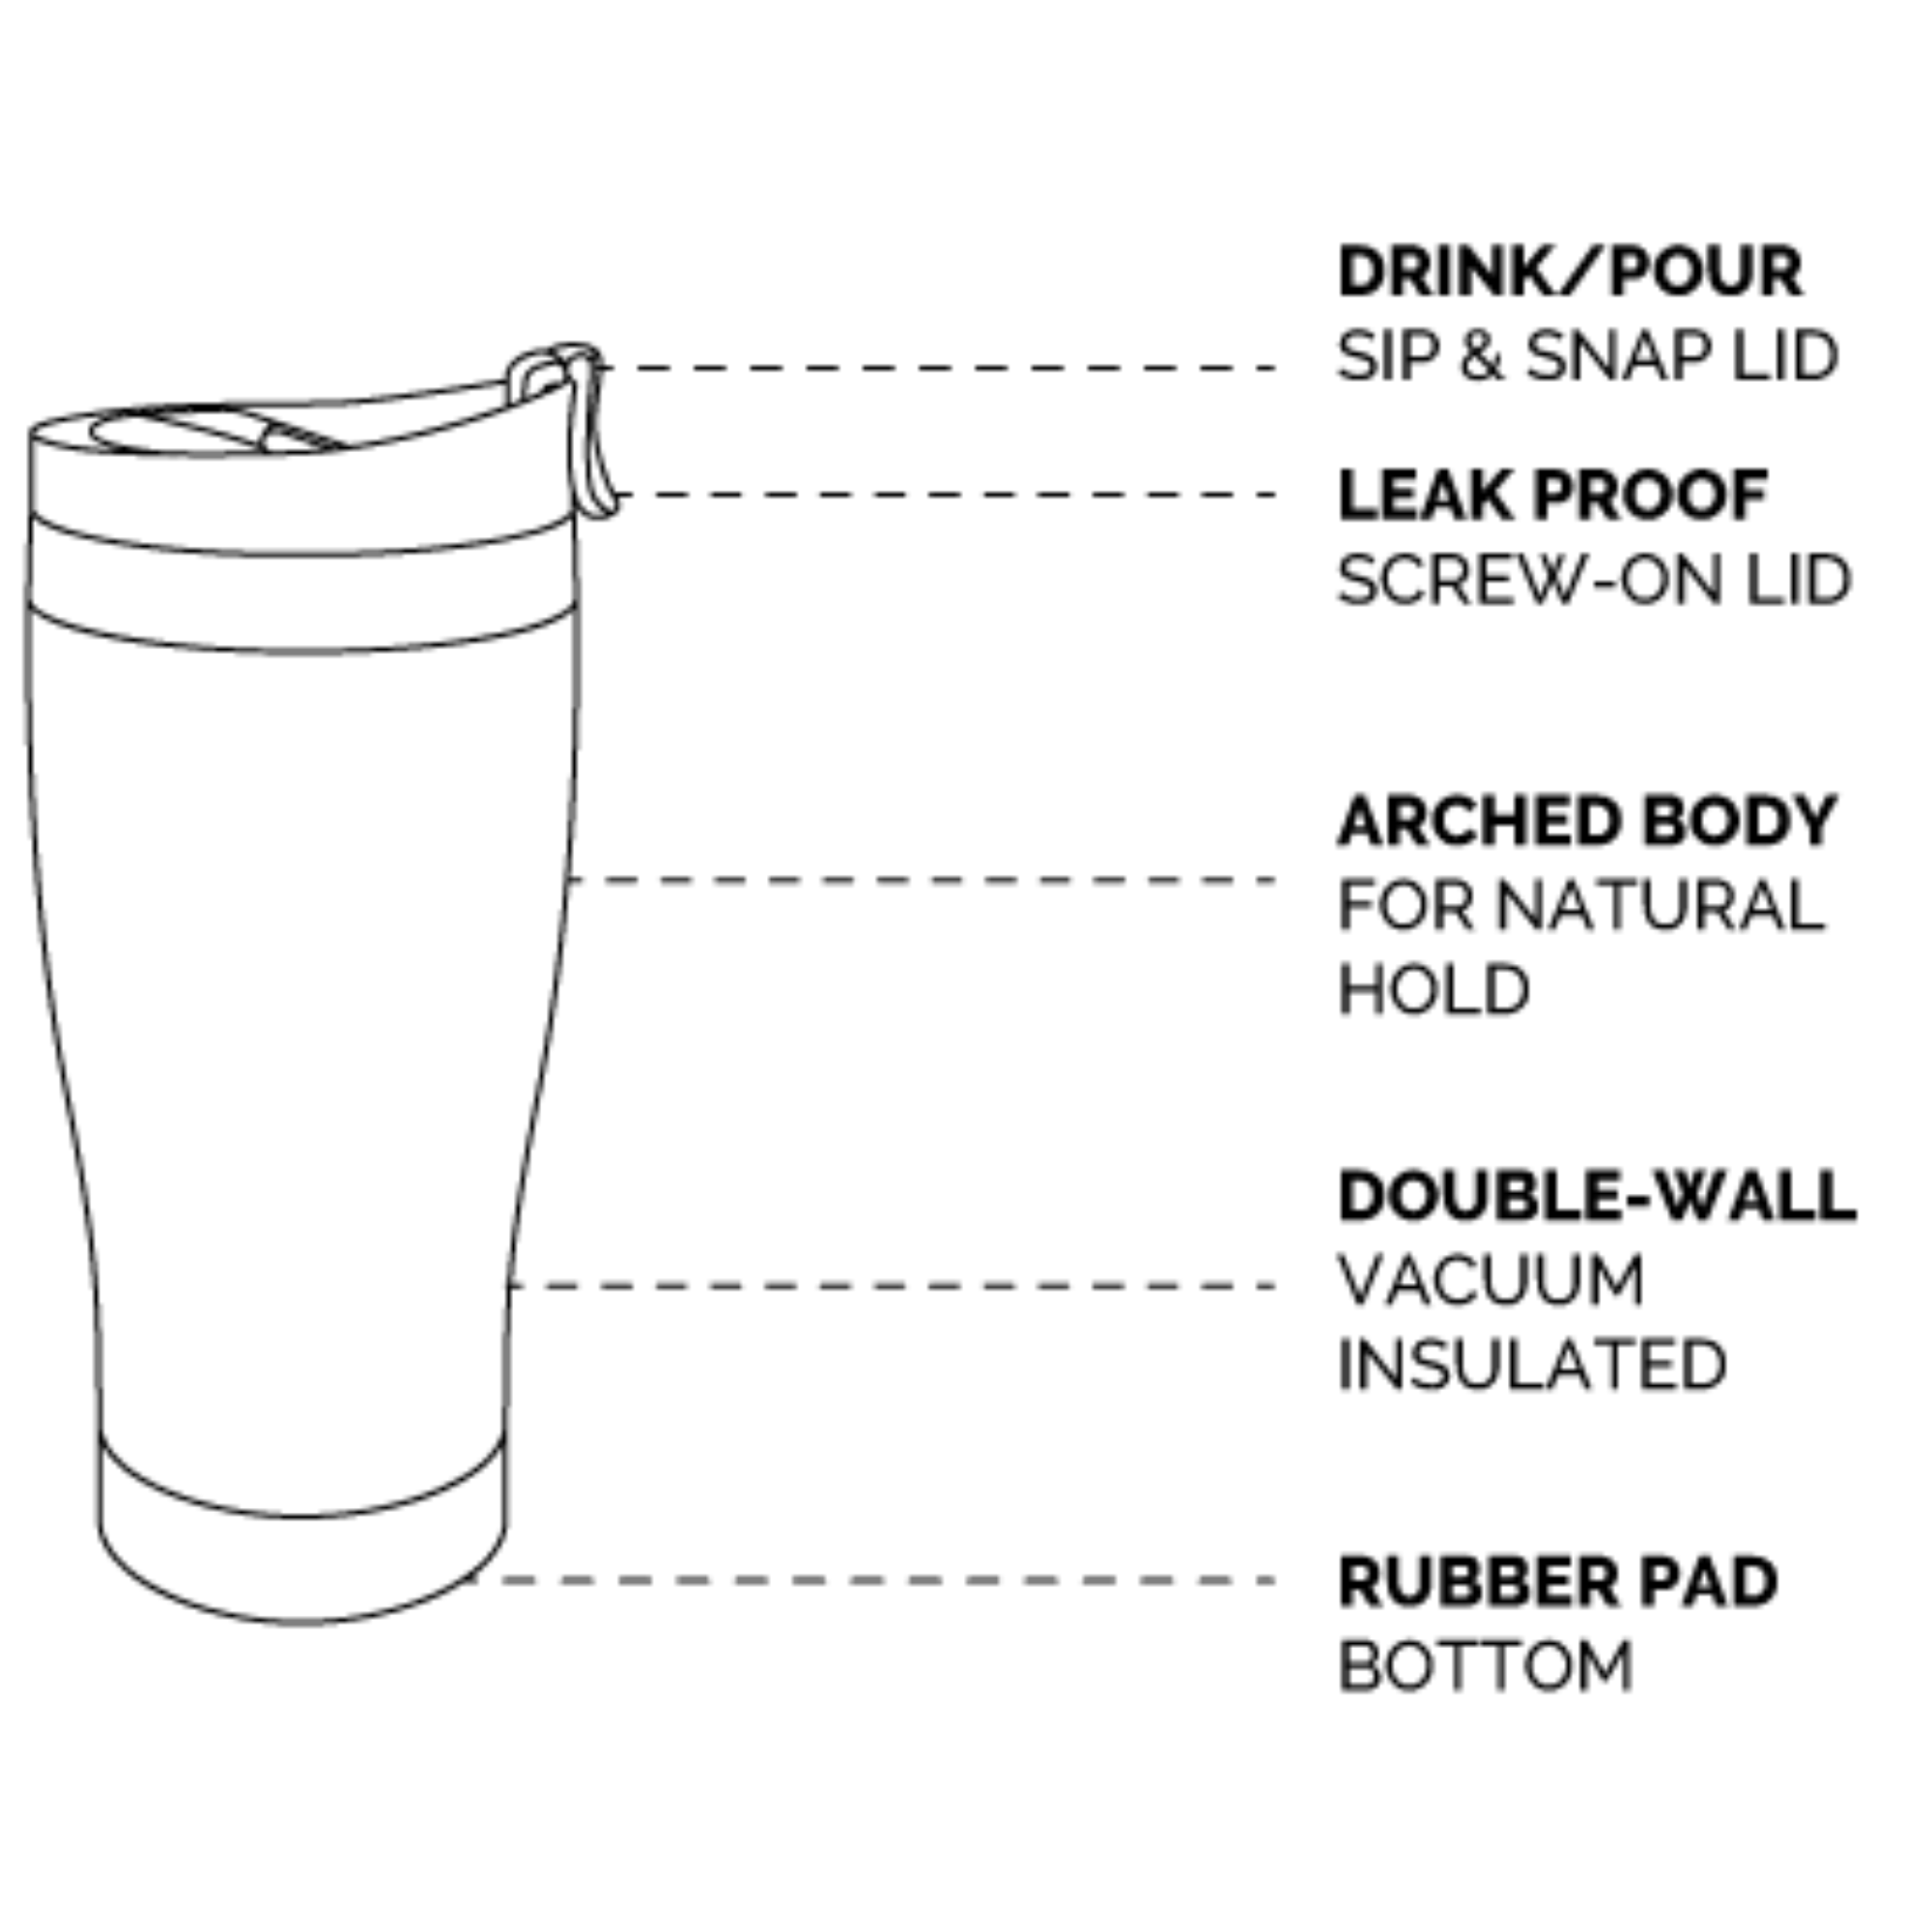 illustration showing Adventure Tumbler's components: drink/pour sip & snap lid; leak-proof screw-on lid; arched body for natural hold; double-wall vacuum insulated; and rubber pad bottom